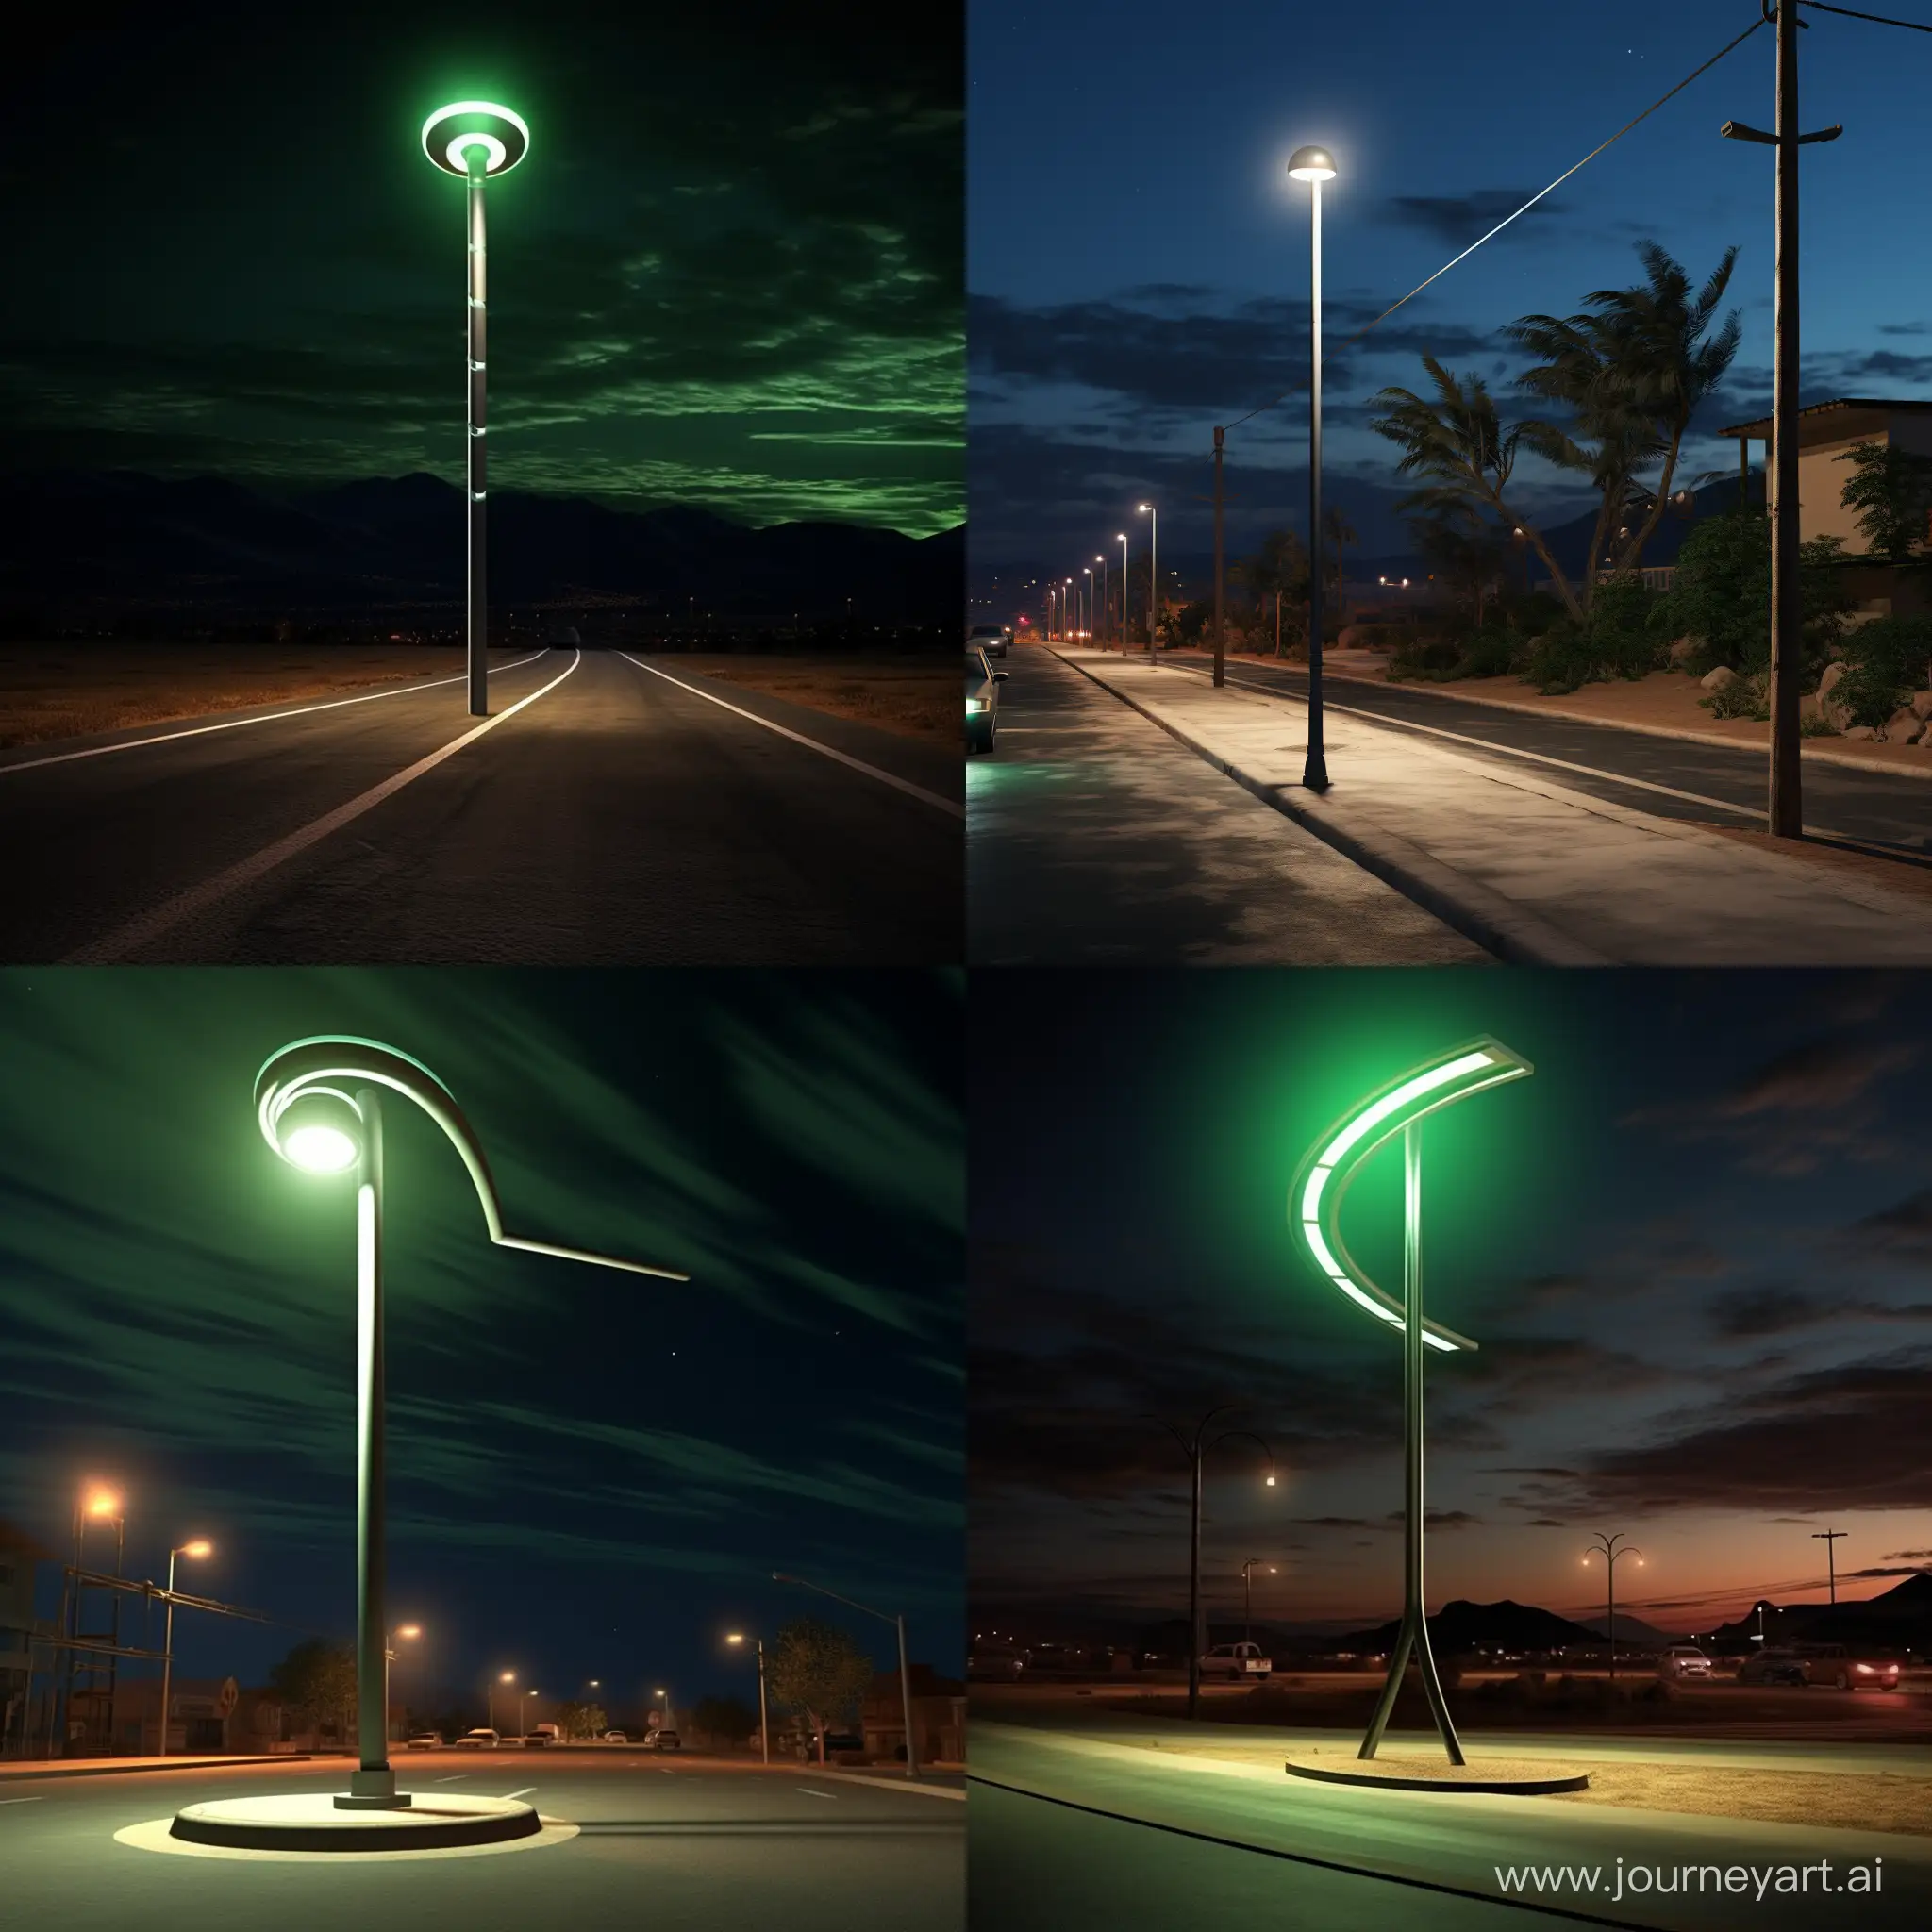 more modern light pole runner on solar energy at night. Lights up the hole street for the driver without blinding the driver. More light. More simple and more light. eviormently friendly. More green. New design
